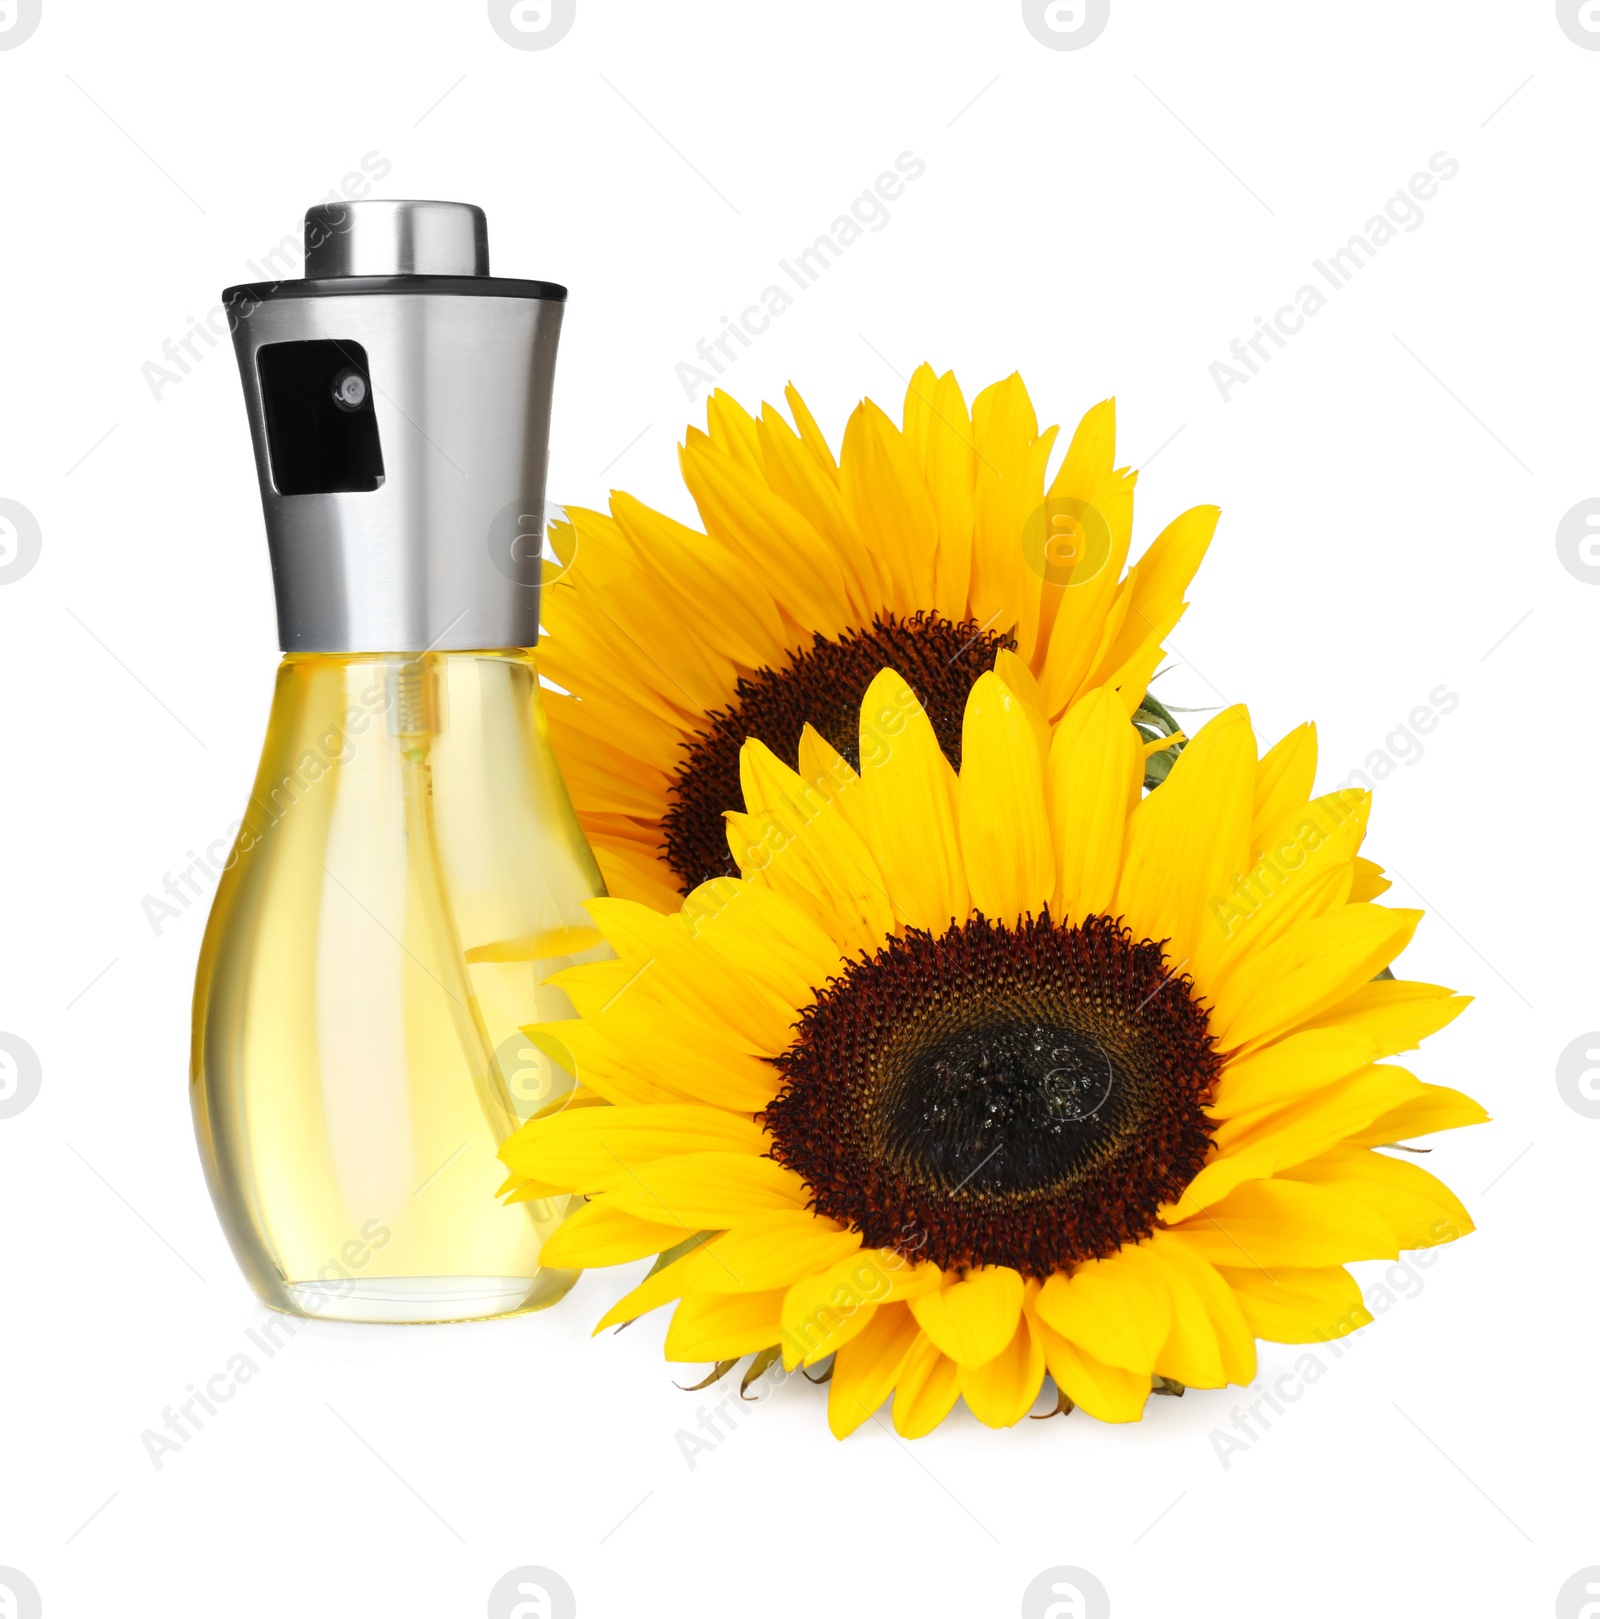 Photo of Spray bottle with cooking oil and sunflowers on white background